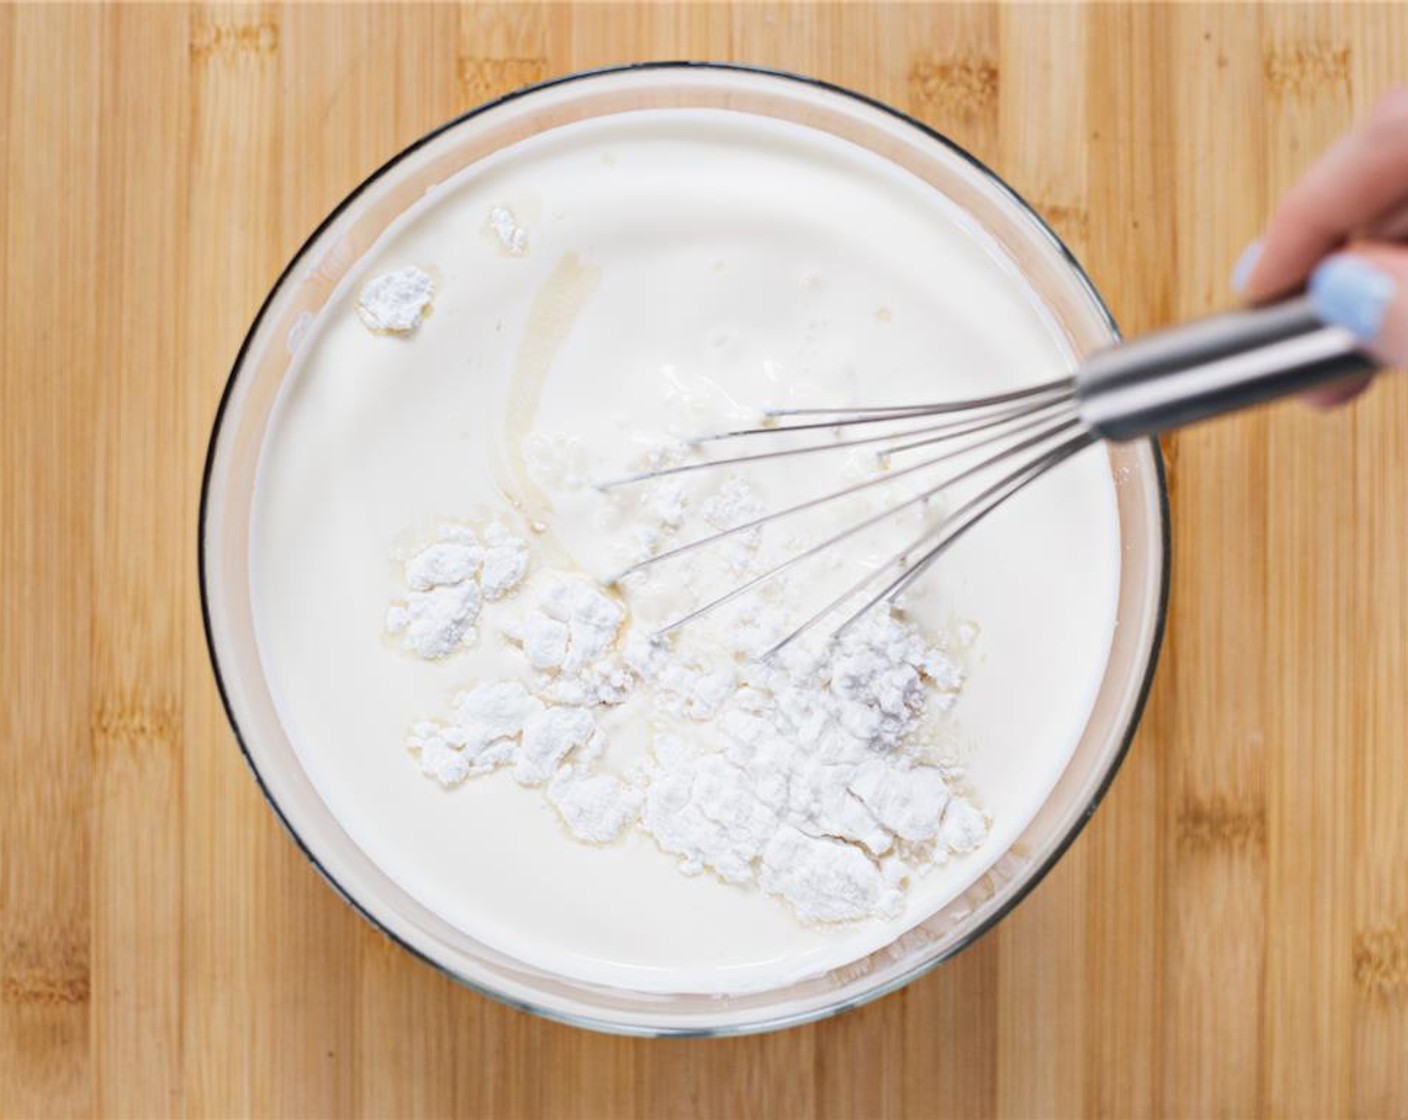 step 1 Combine Heavy Cream (3 cups), 2% Reduced Fat Milk (1 cup), Powdered Confectioners Sugar (1 1/2 cups), Vanilla Extract (1 Tbsp), and Salt (1 tsp) in a large bowl. Whisk to combine.